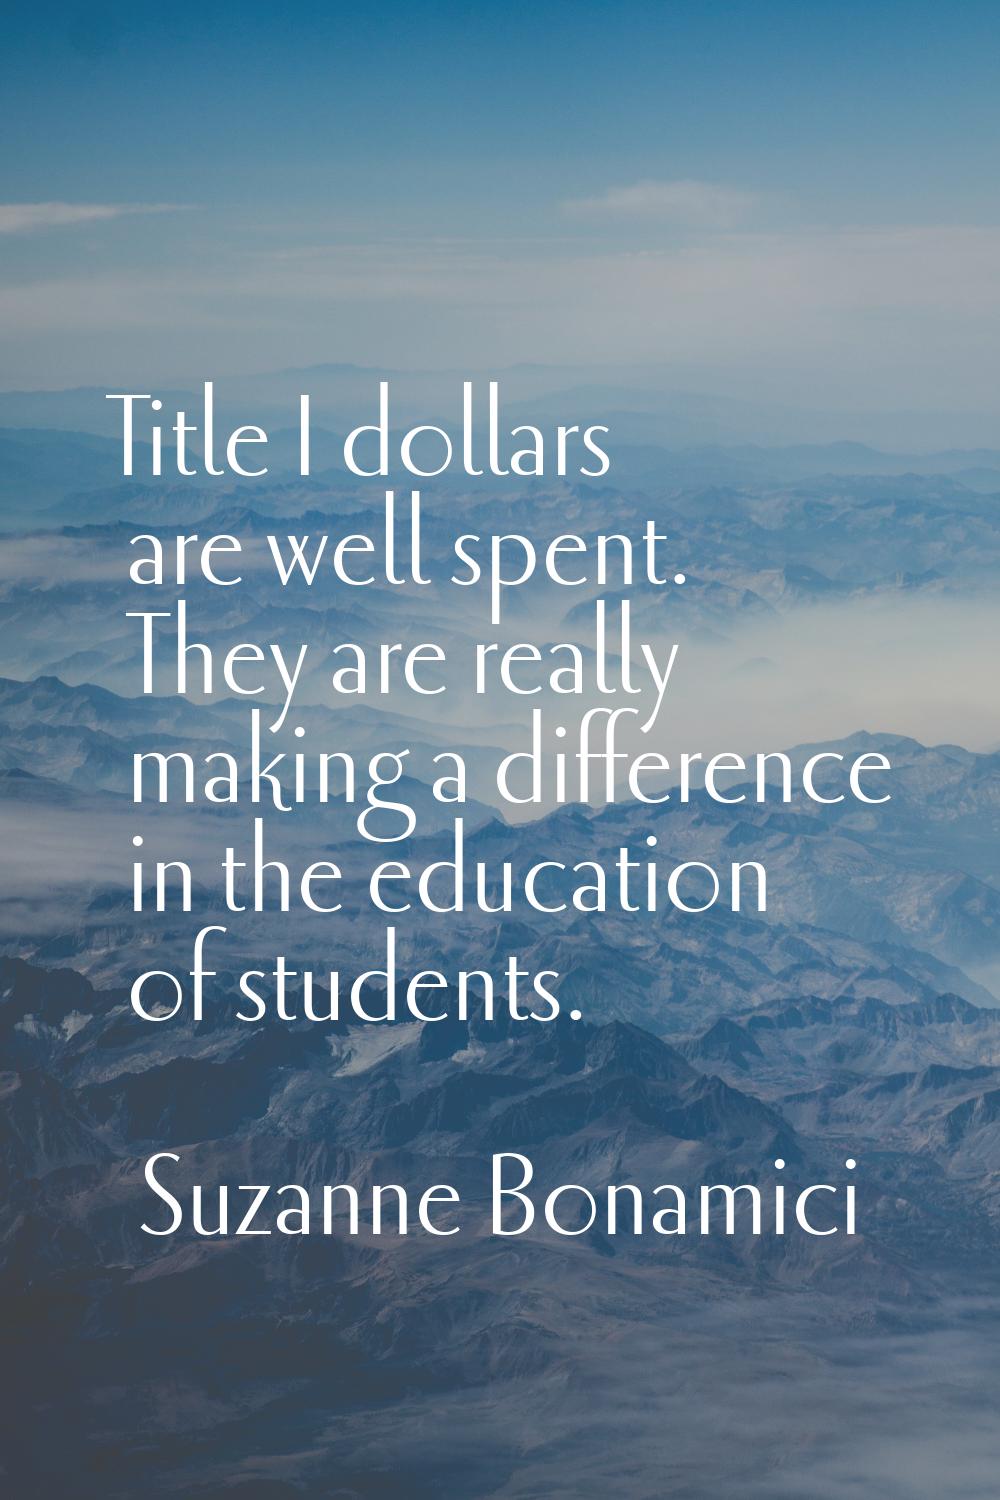 Title I dollars are well spent. They are really making a difference in the education of students.